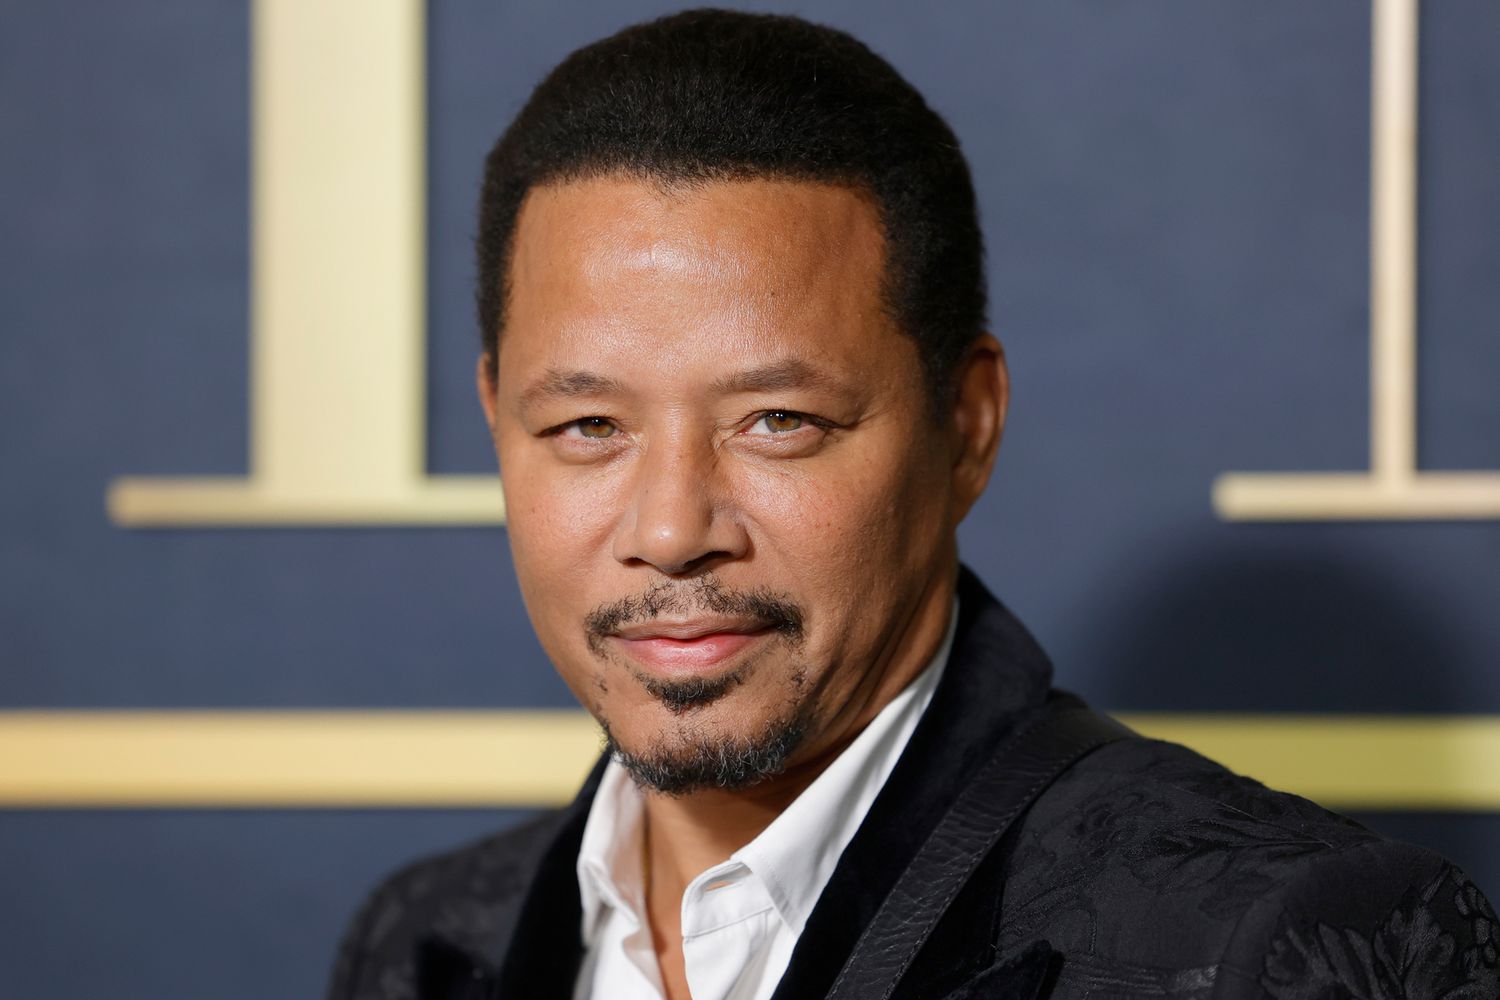 Terrence Howard is an actor in great demand, producer, fan of